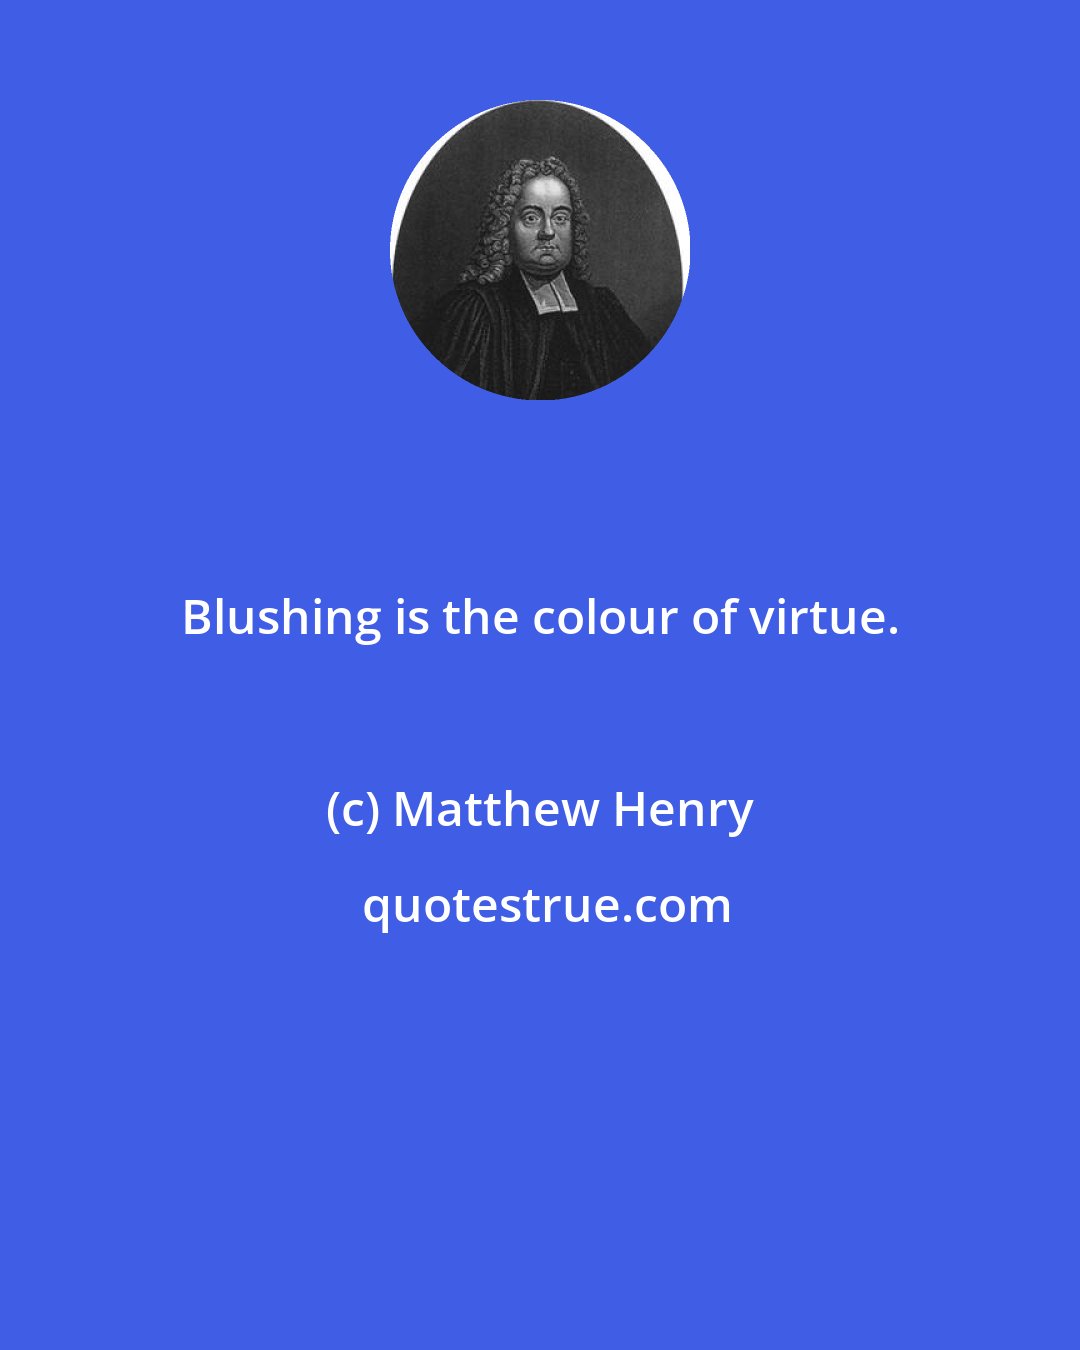 Matthew Henry: Blushing is the colour of virtue.